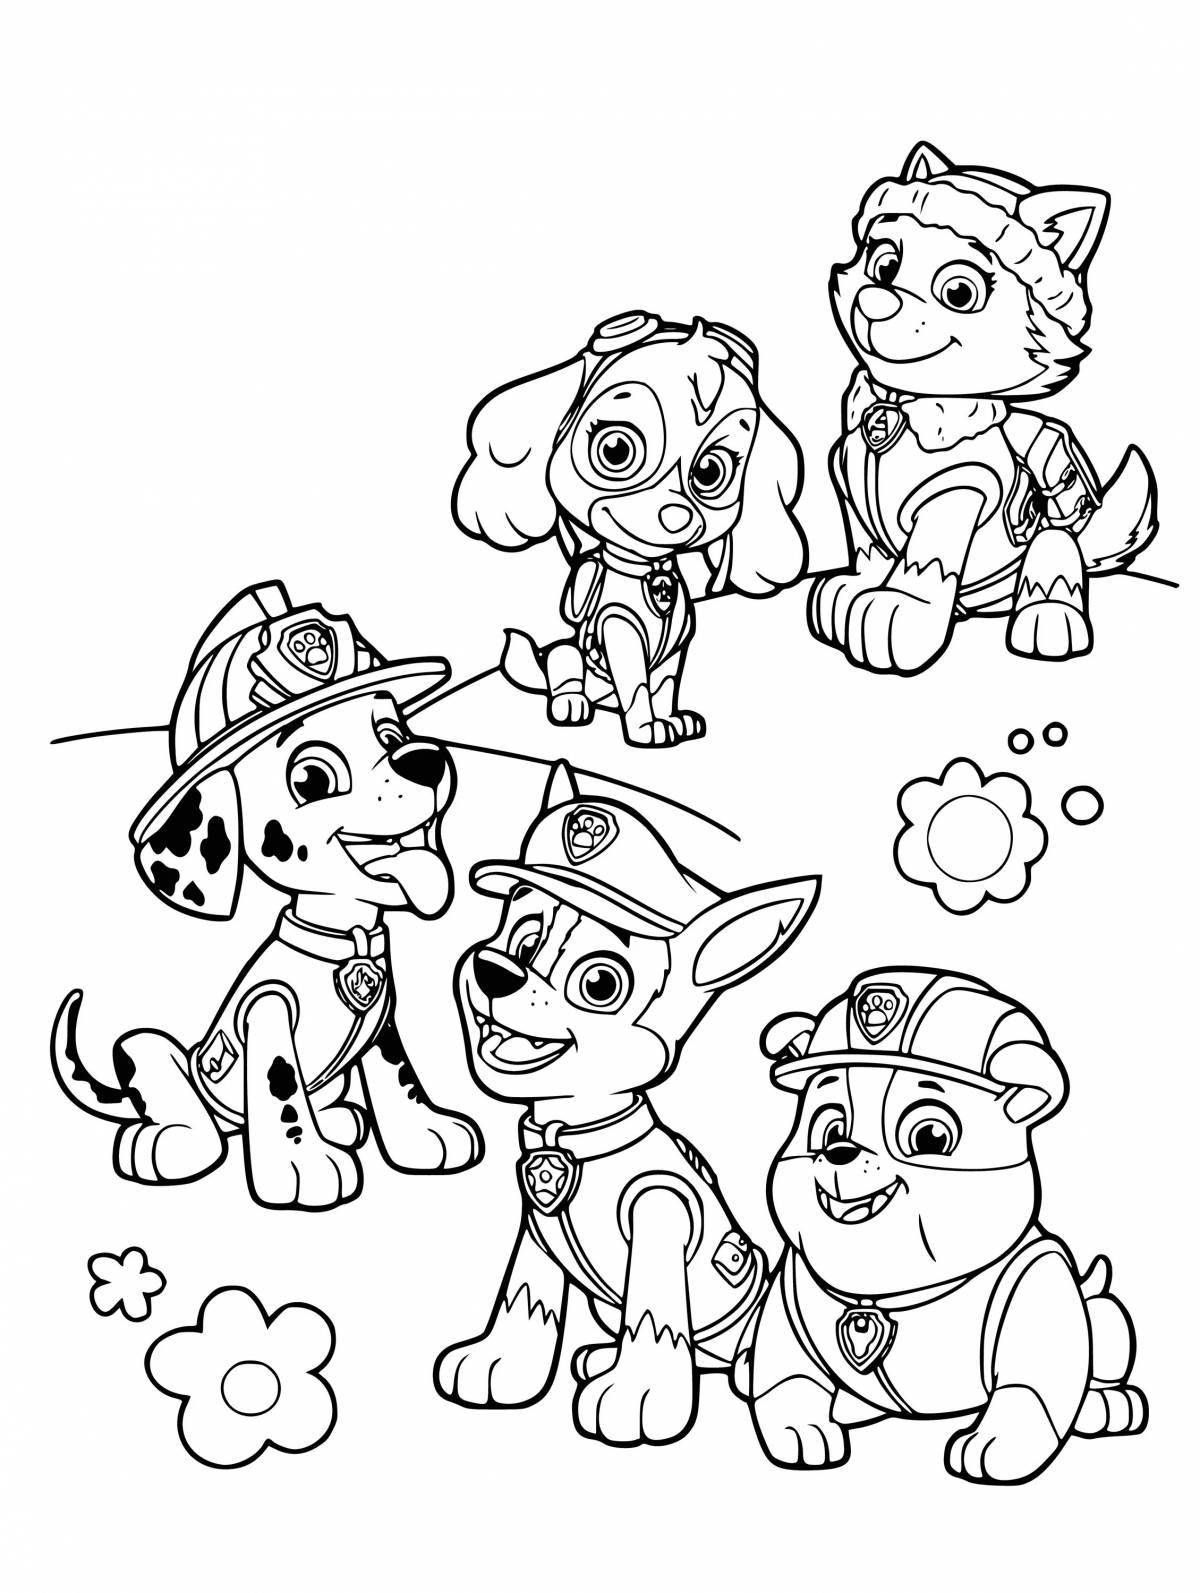 Attractive Paw Patrol Coloring Page for Toddlers